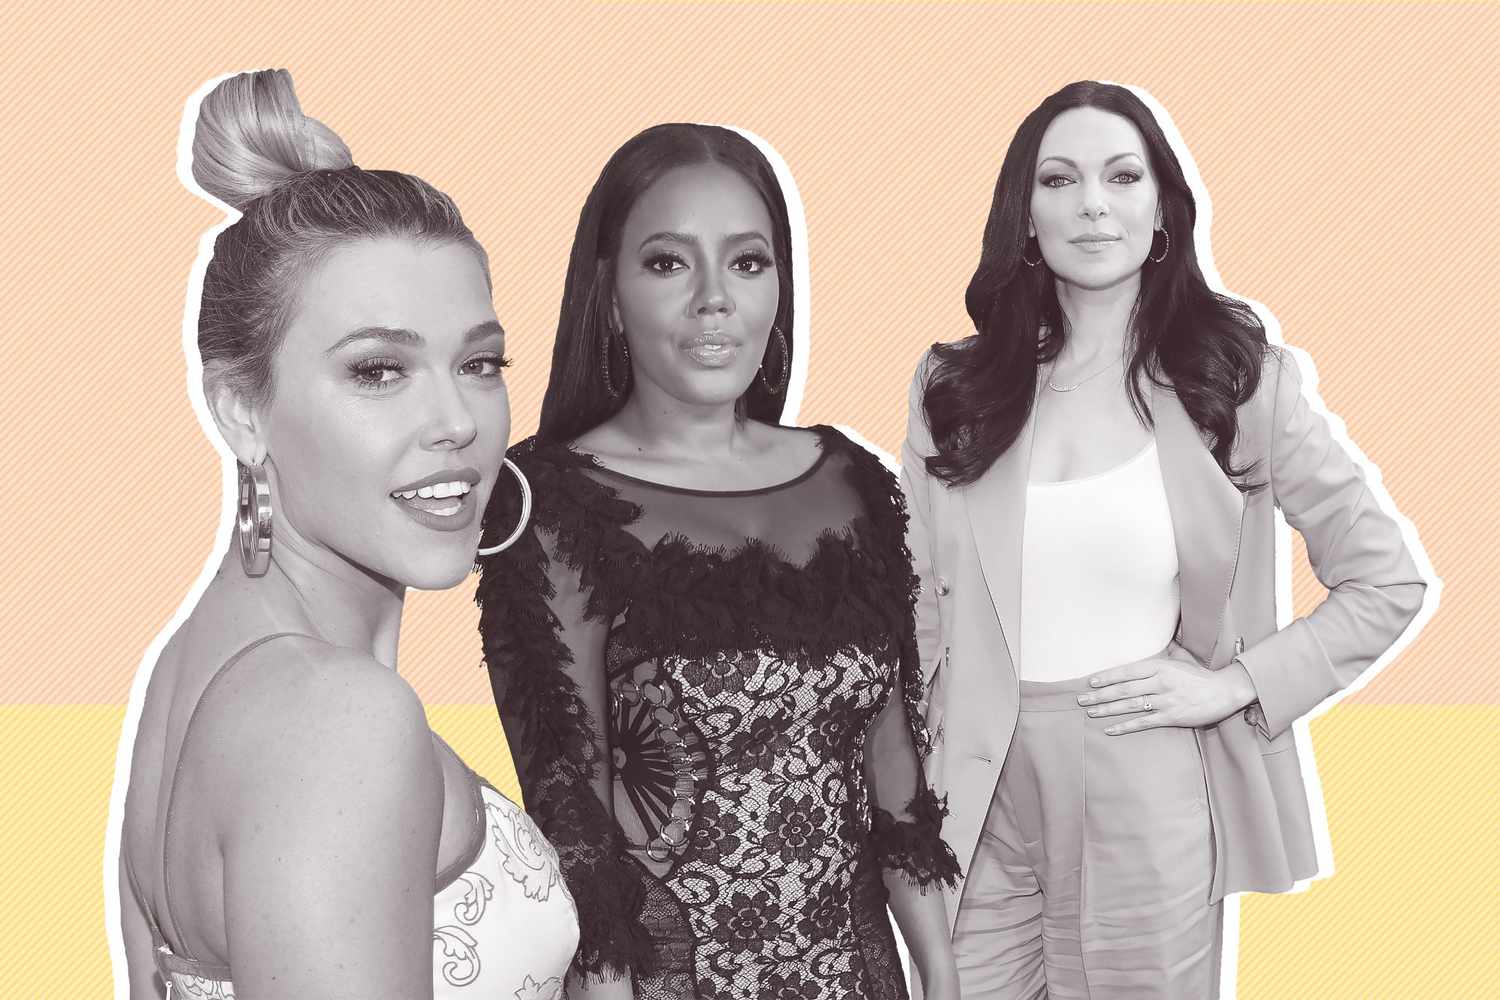 Rachel Platten, Angela Simmons, and Laura Prepon on a patterned background